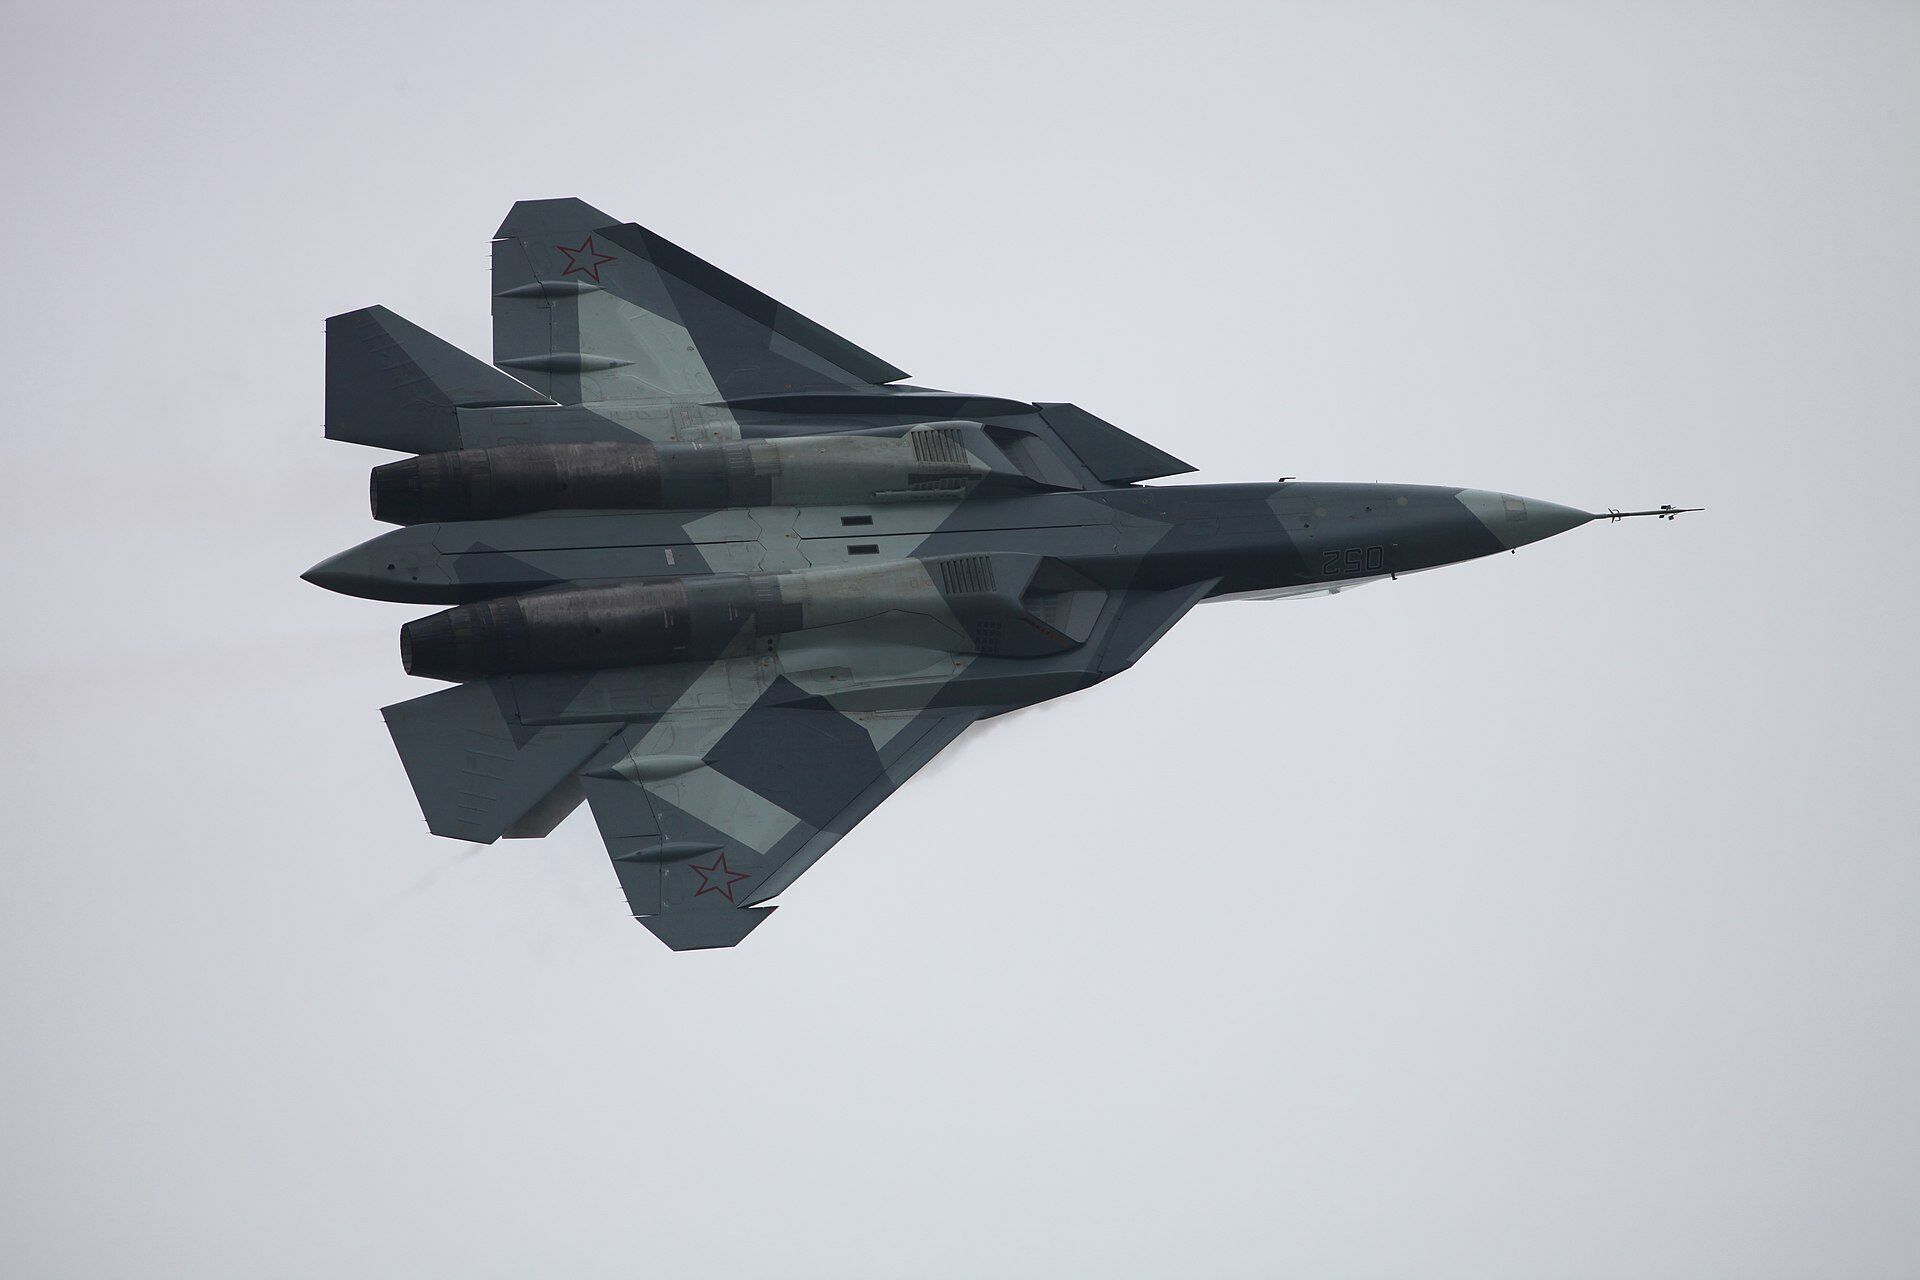 DIU destroys the most advanced Russian Su-57 fighter jet for the first time: images show craters from the explosion and traces of fire